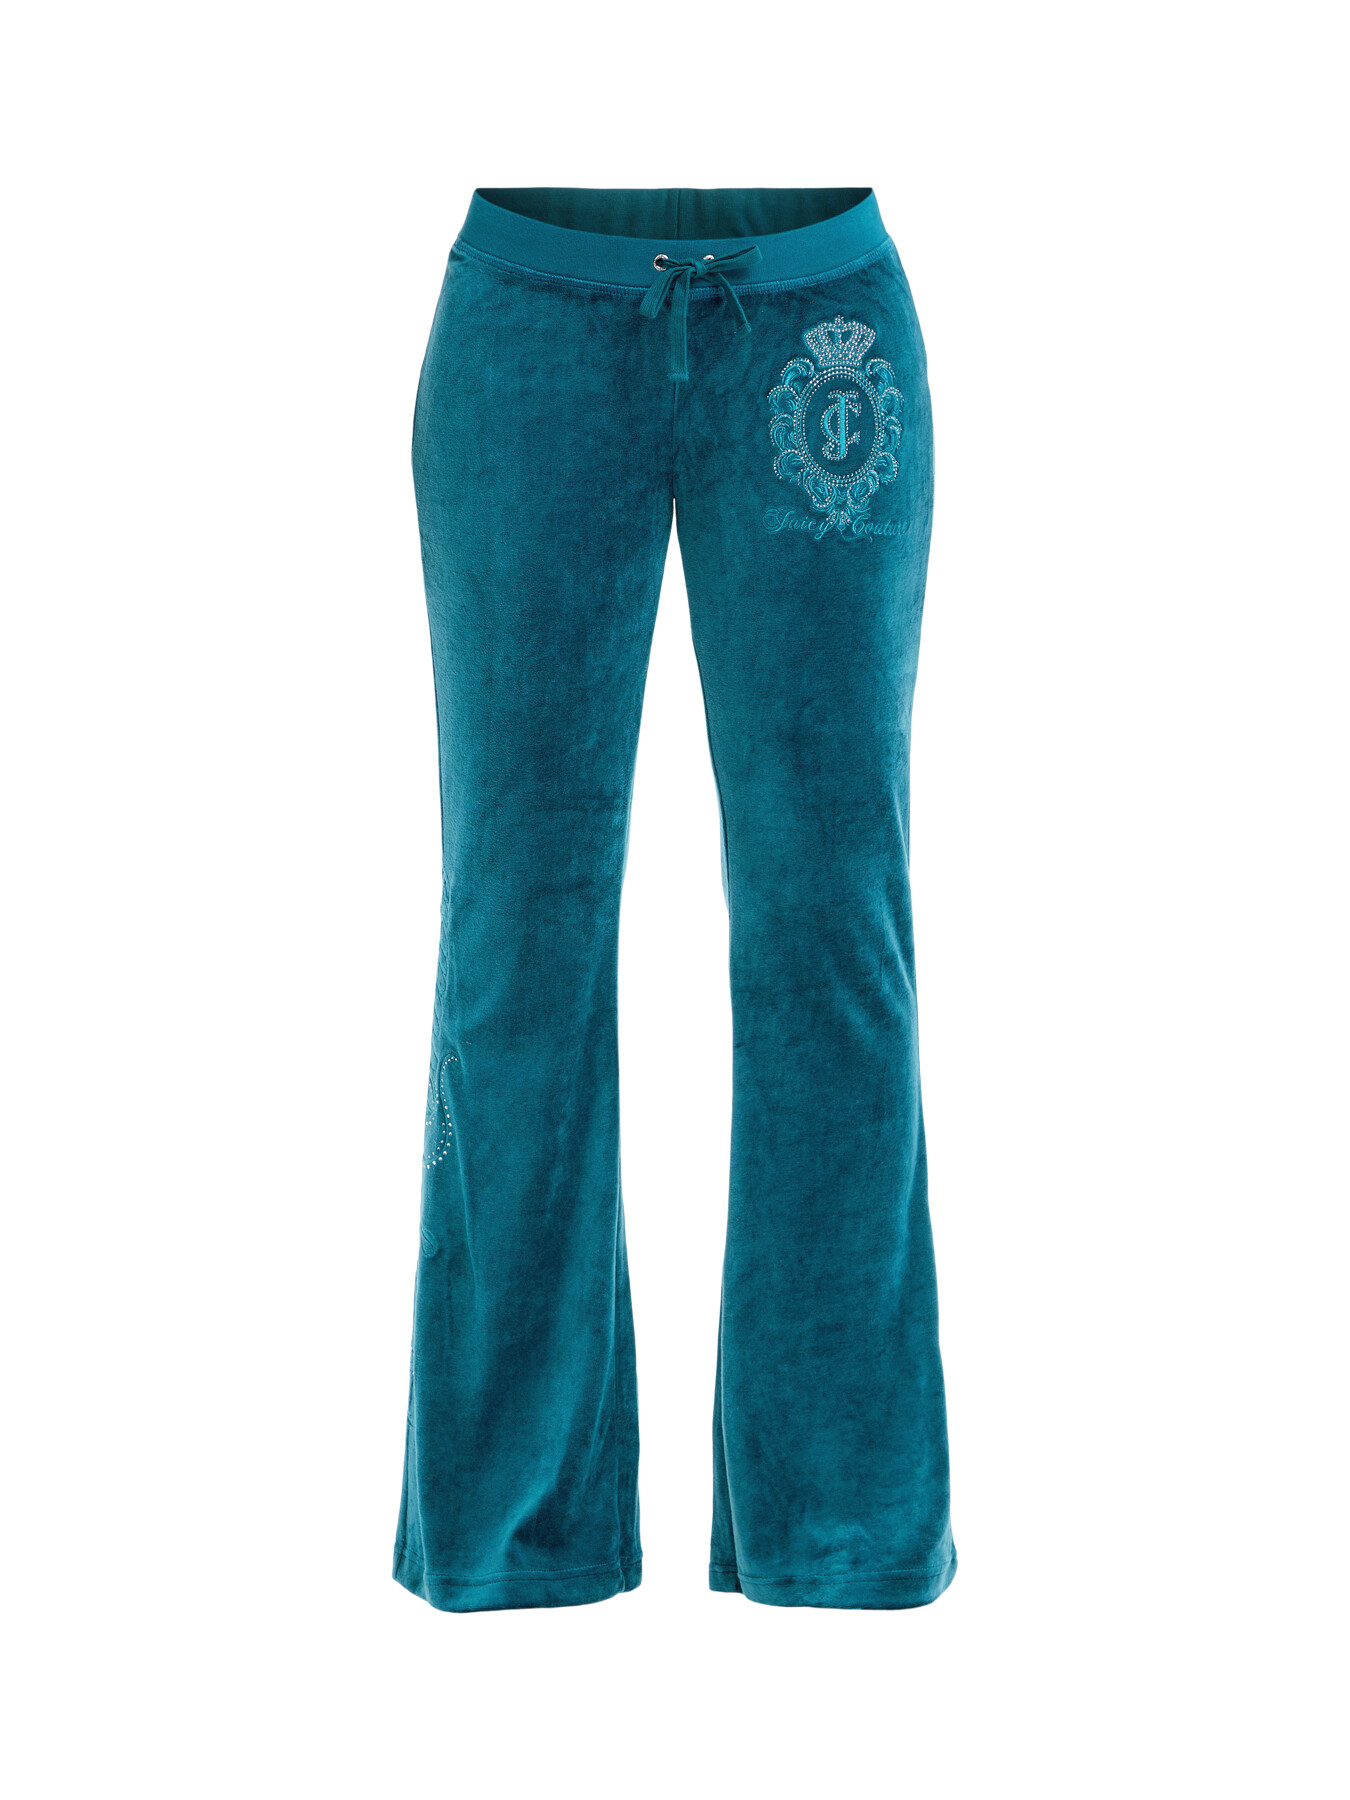 Juicy Couture Women's Heritage Crest Ultra Low Rise Bamboo Trousers Blue